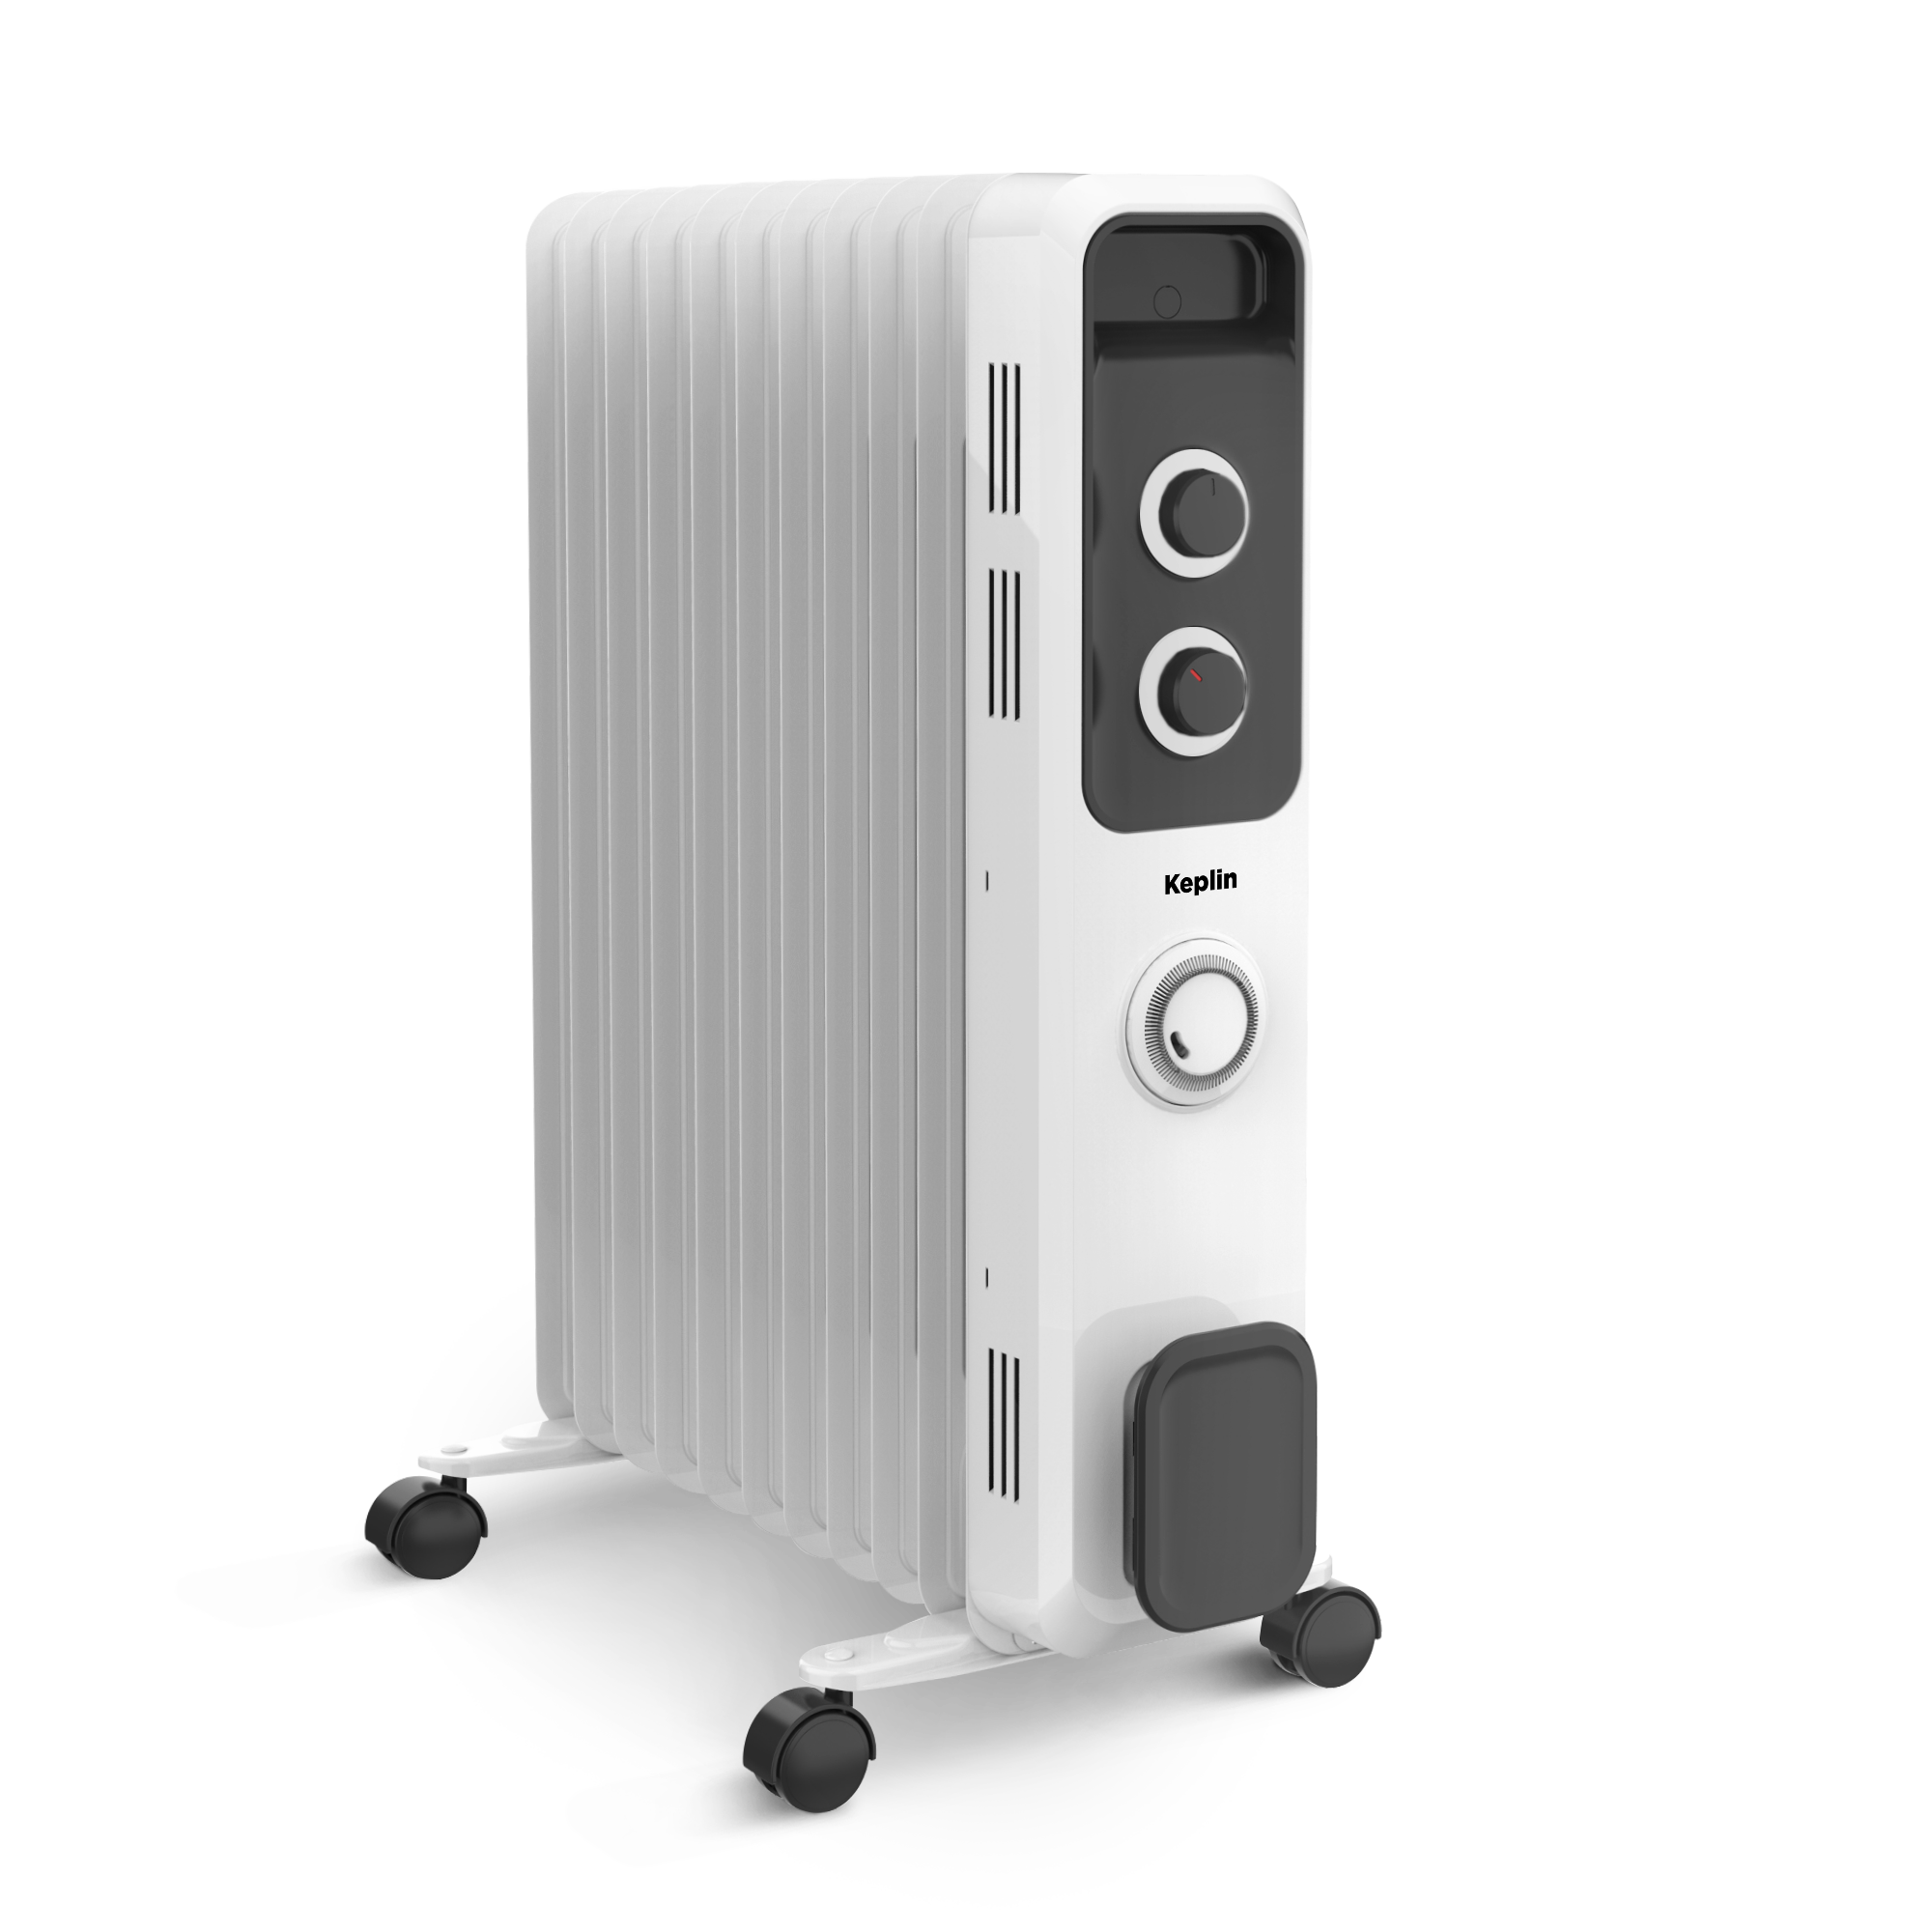 2500W Oil Filled Radiator With Timer - Efficient & Portable Electric Heater with Remote Control